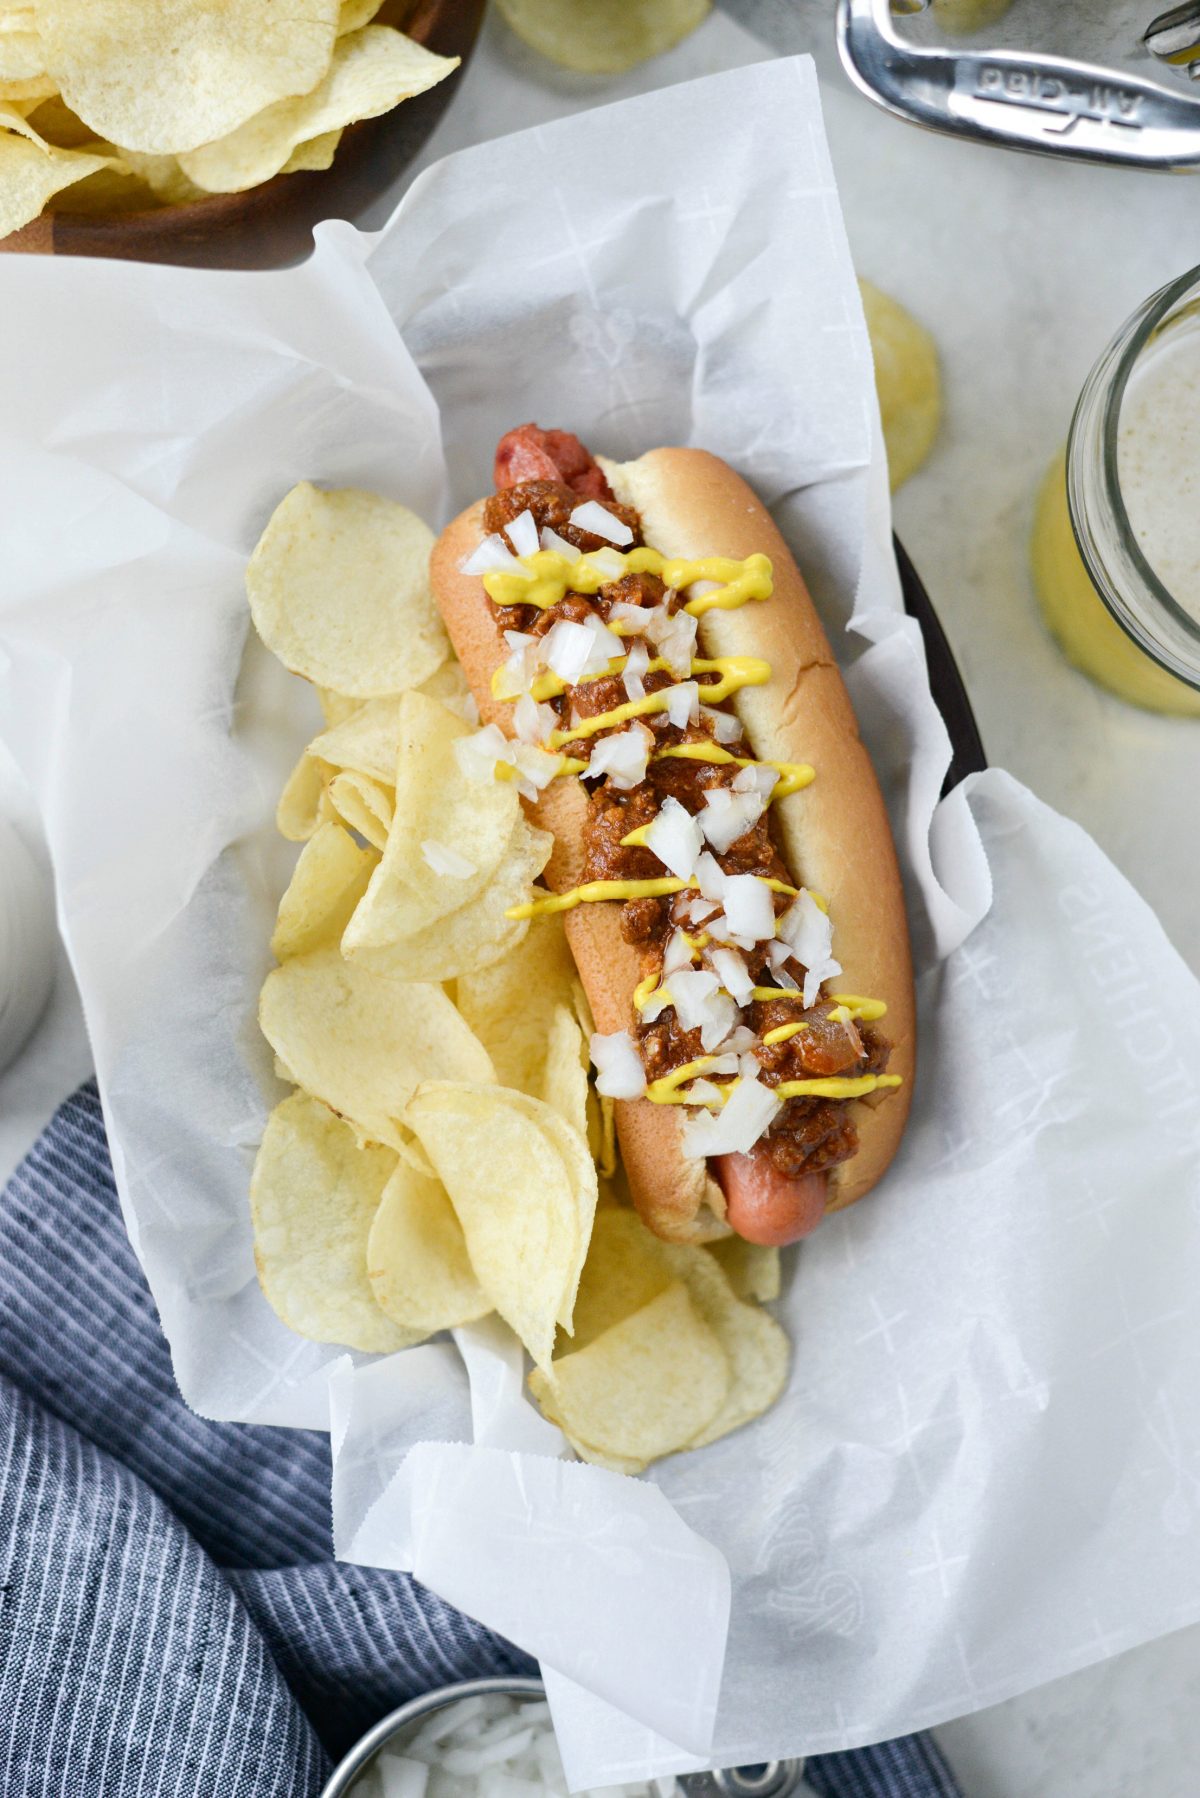 Detroit Style Coney Dogs l SimplyScratch.com #chili #dogs #detroit #coneydogs #homemade